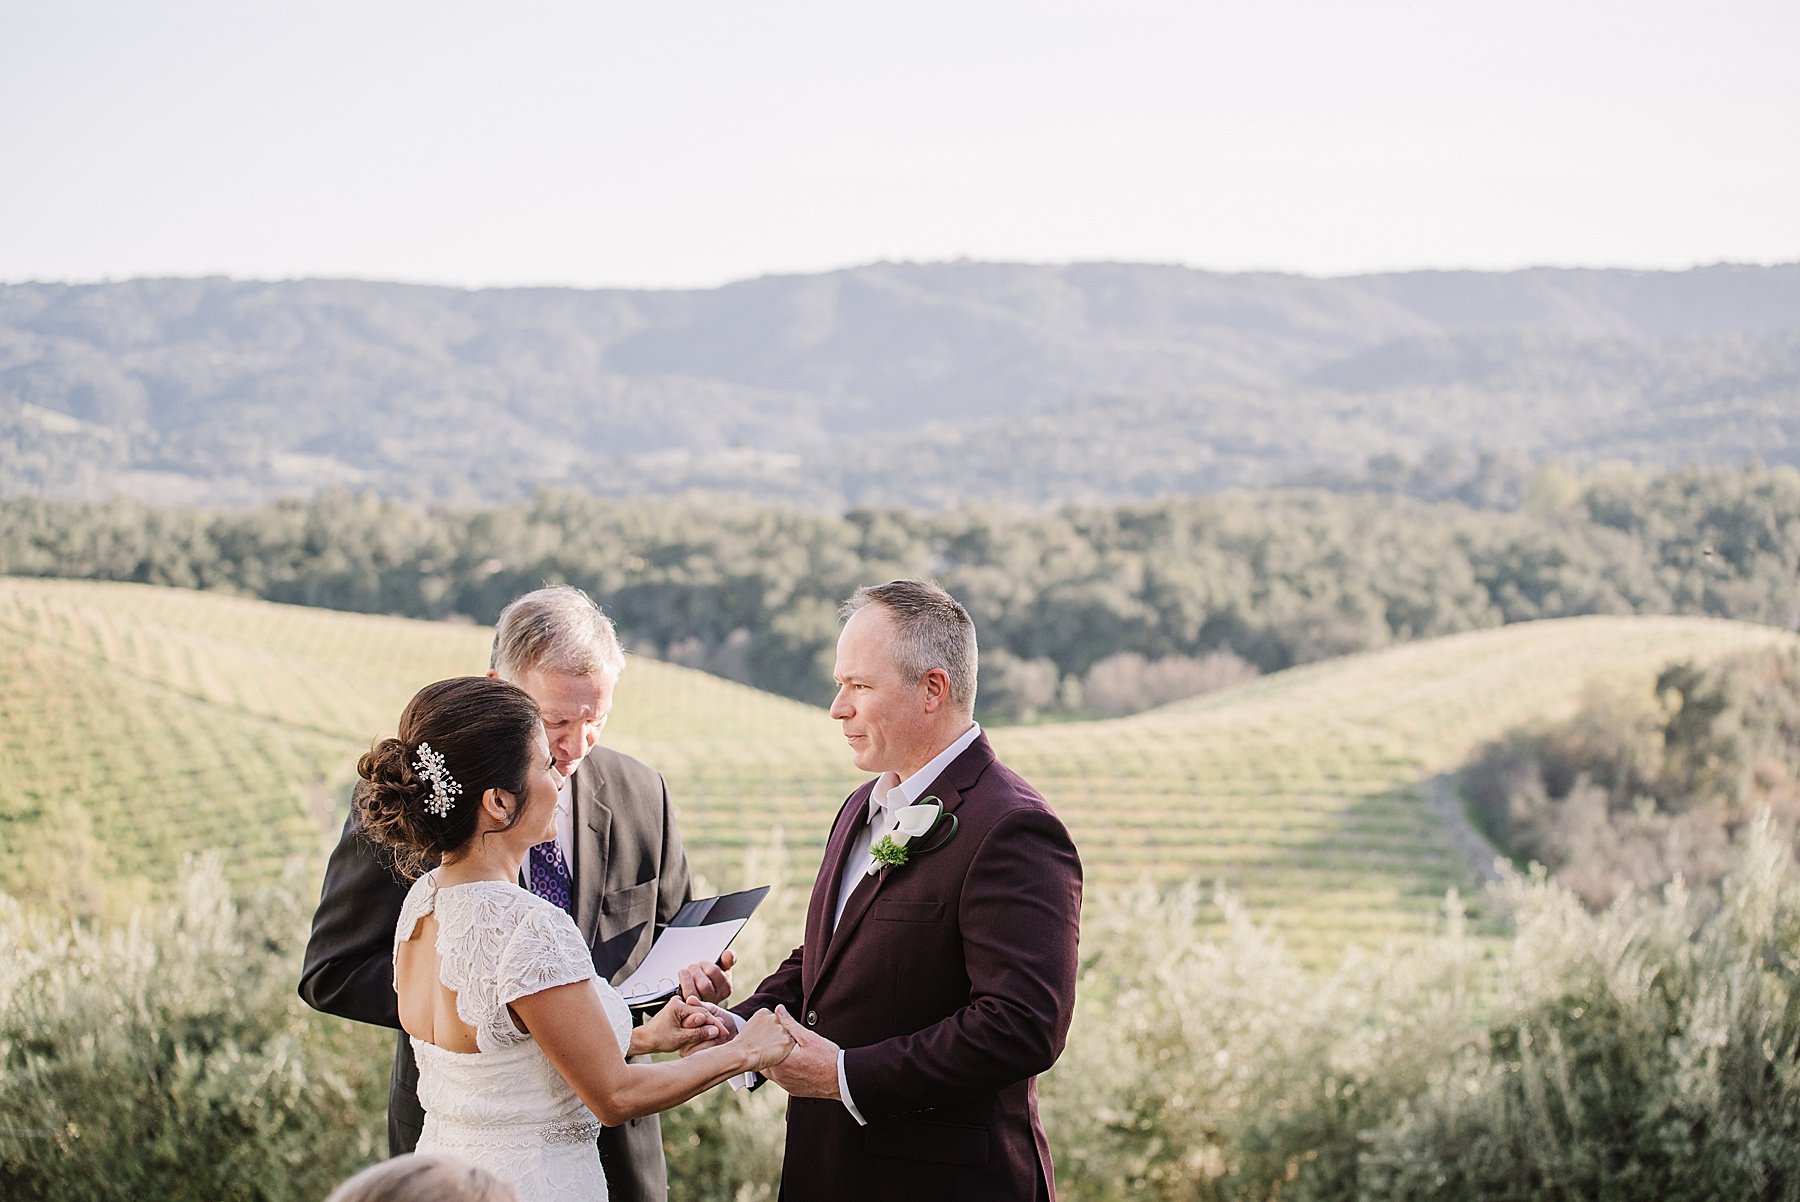 Nikkels Photography, a SLO-based Wedding Photographer, shares expected wedding trends for couples planning their wedding.